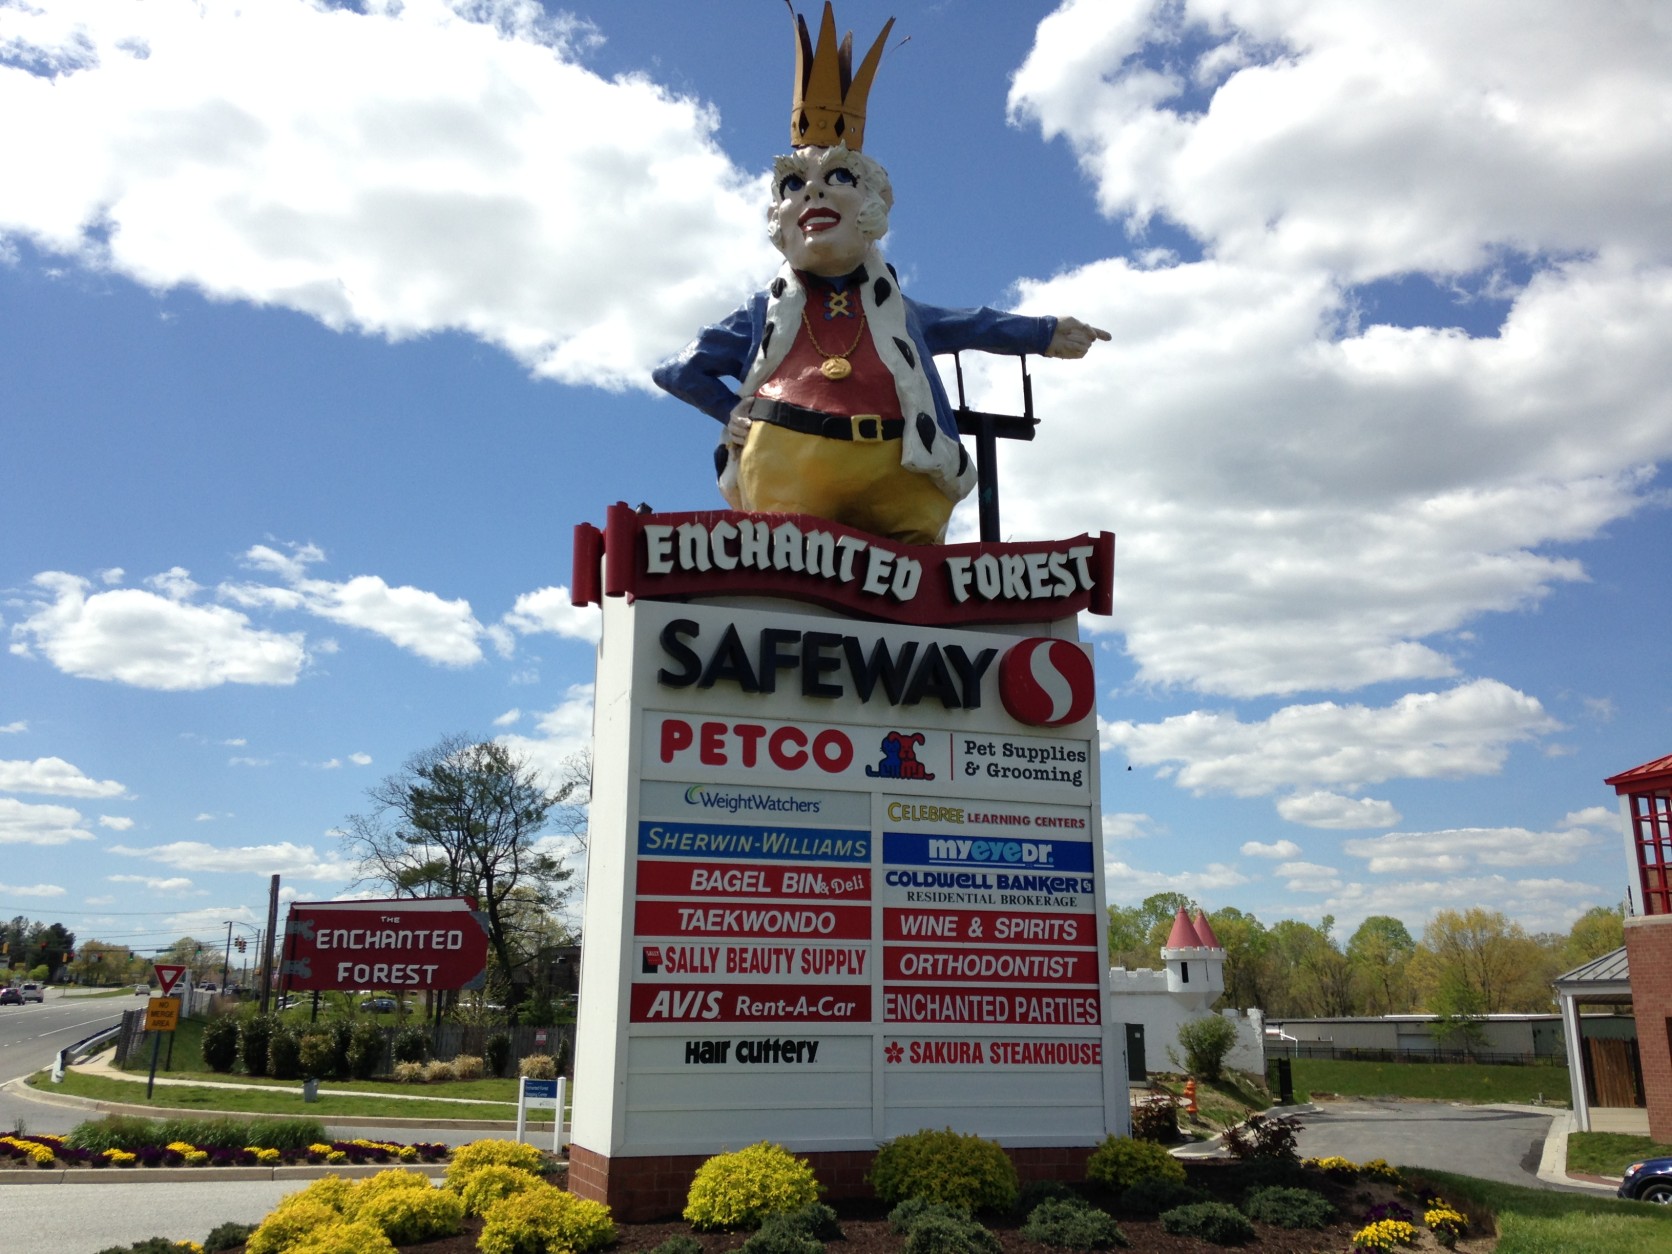 Old King Cole used to stand on a pole at the entrance to the Enchanted Forest theme park. Today, he's part of the sign at the entrance to the shopping center that replaced the park. (WTOP/Michelle Basch)